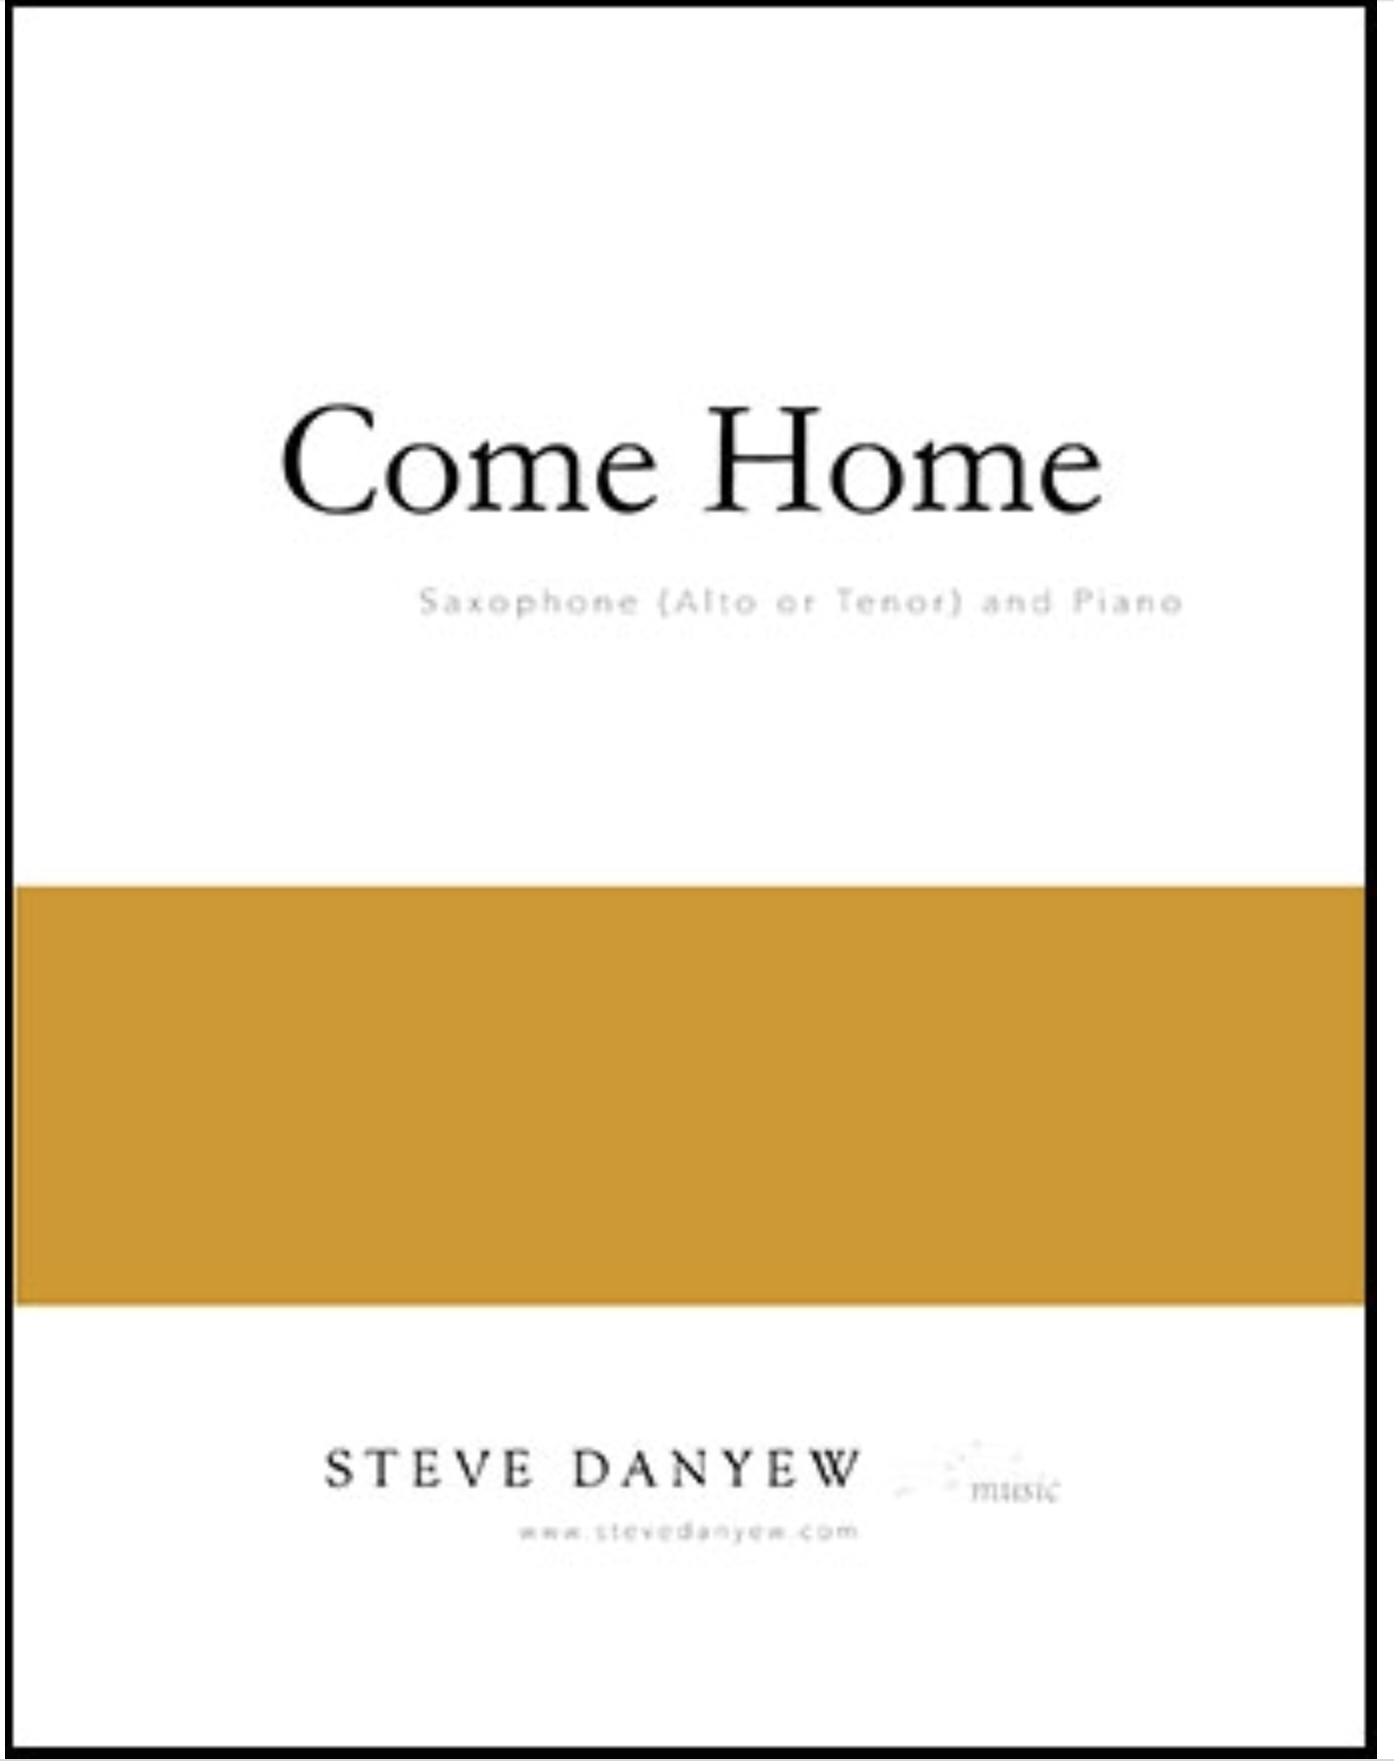 Come Home  by Steve Danyew